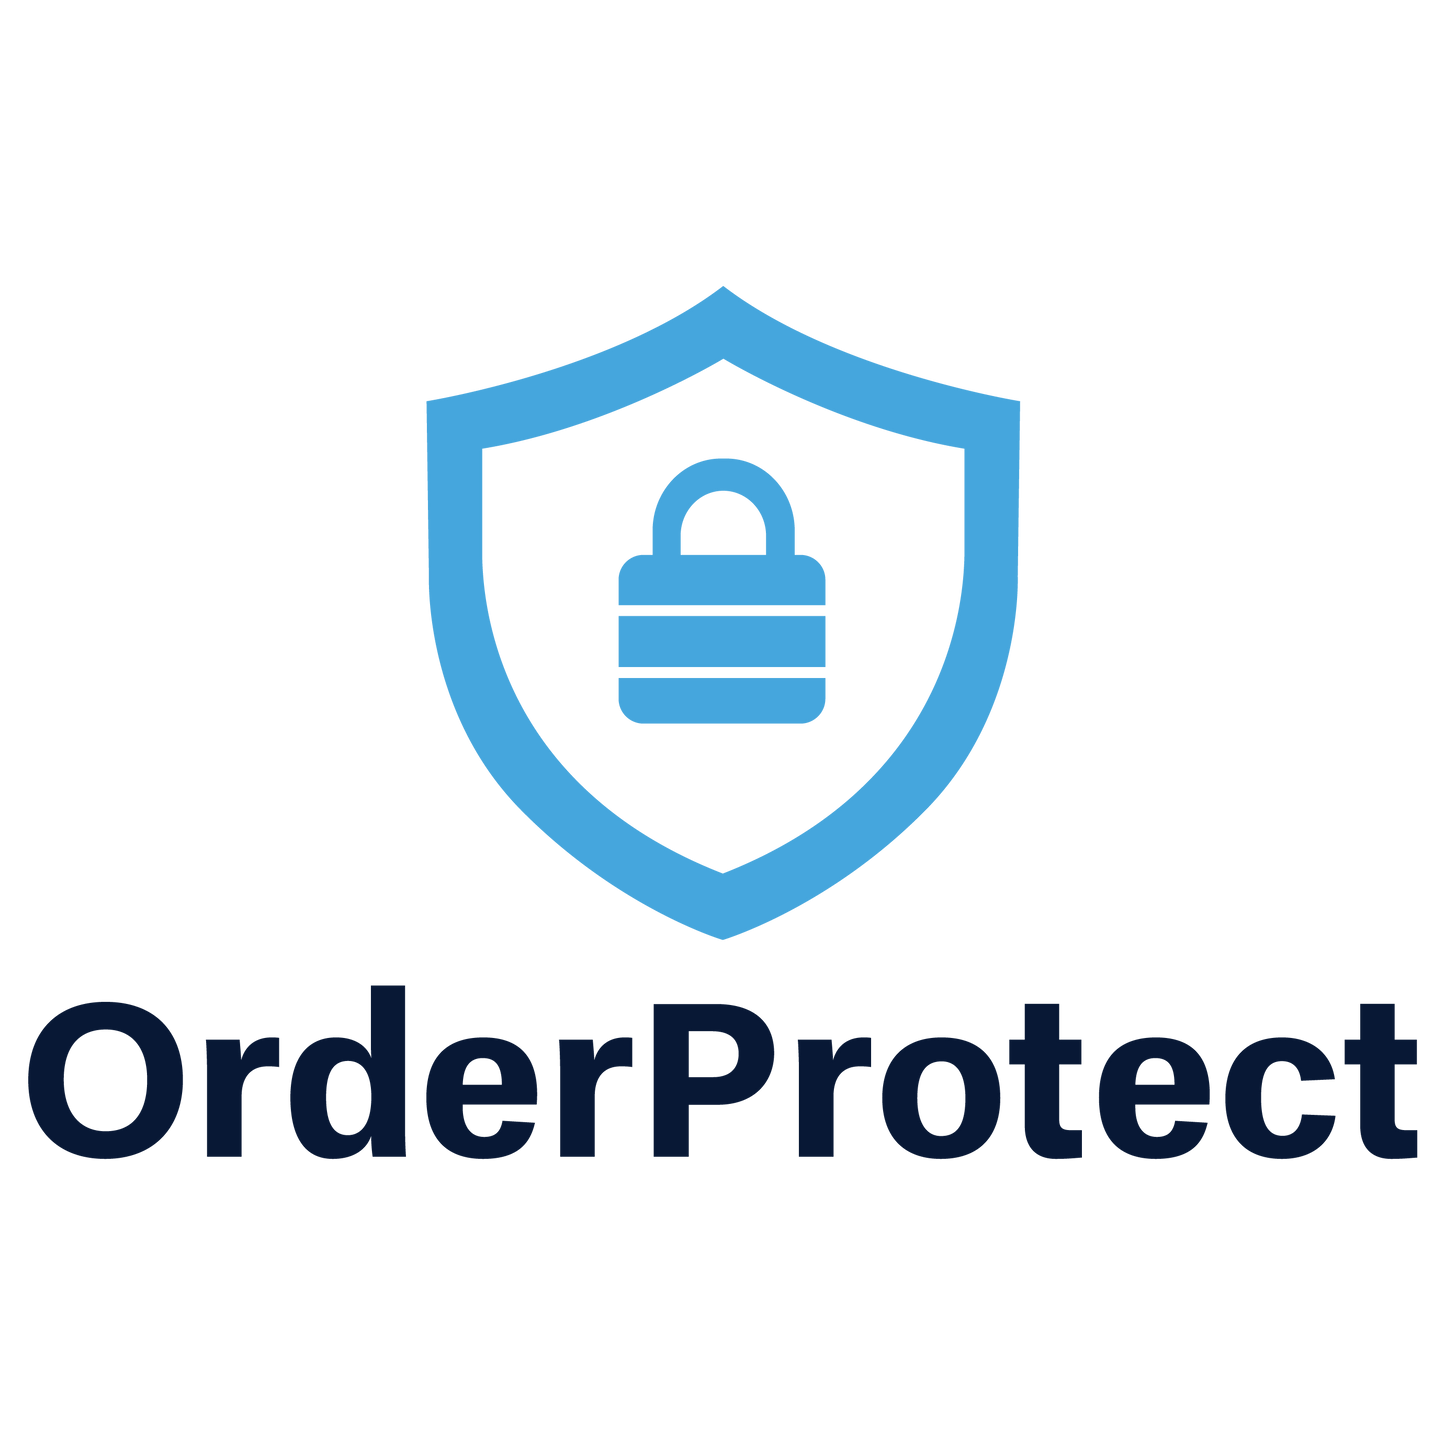 Order Protect